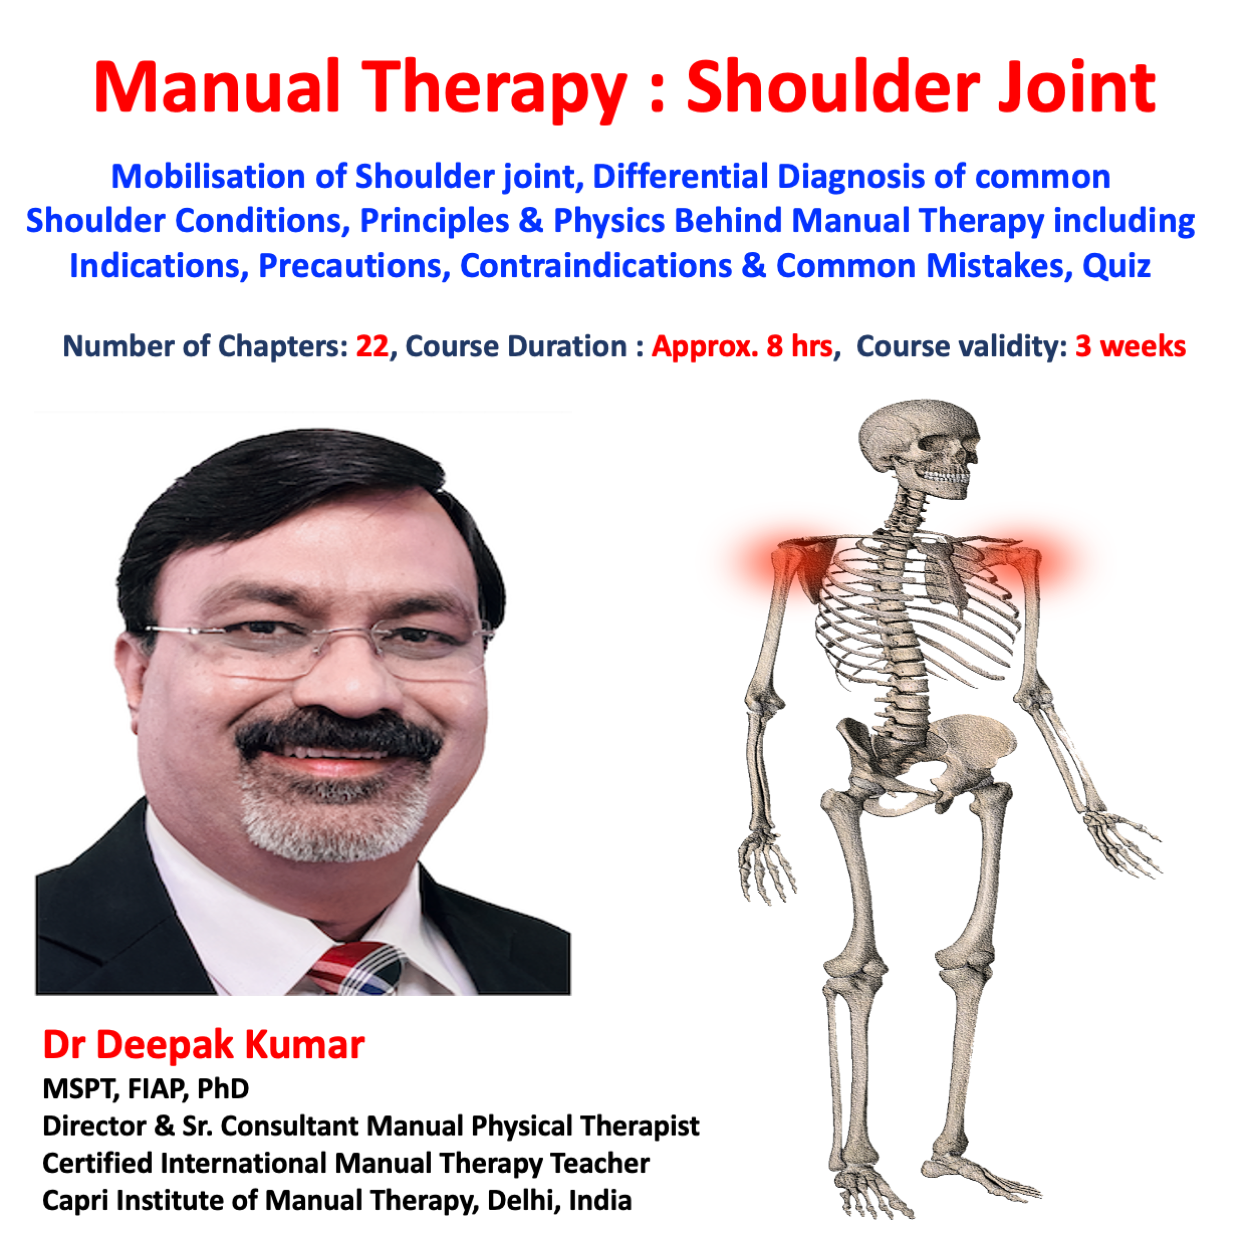 Manual Therapy : Shoulder Joint